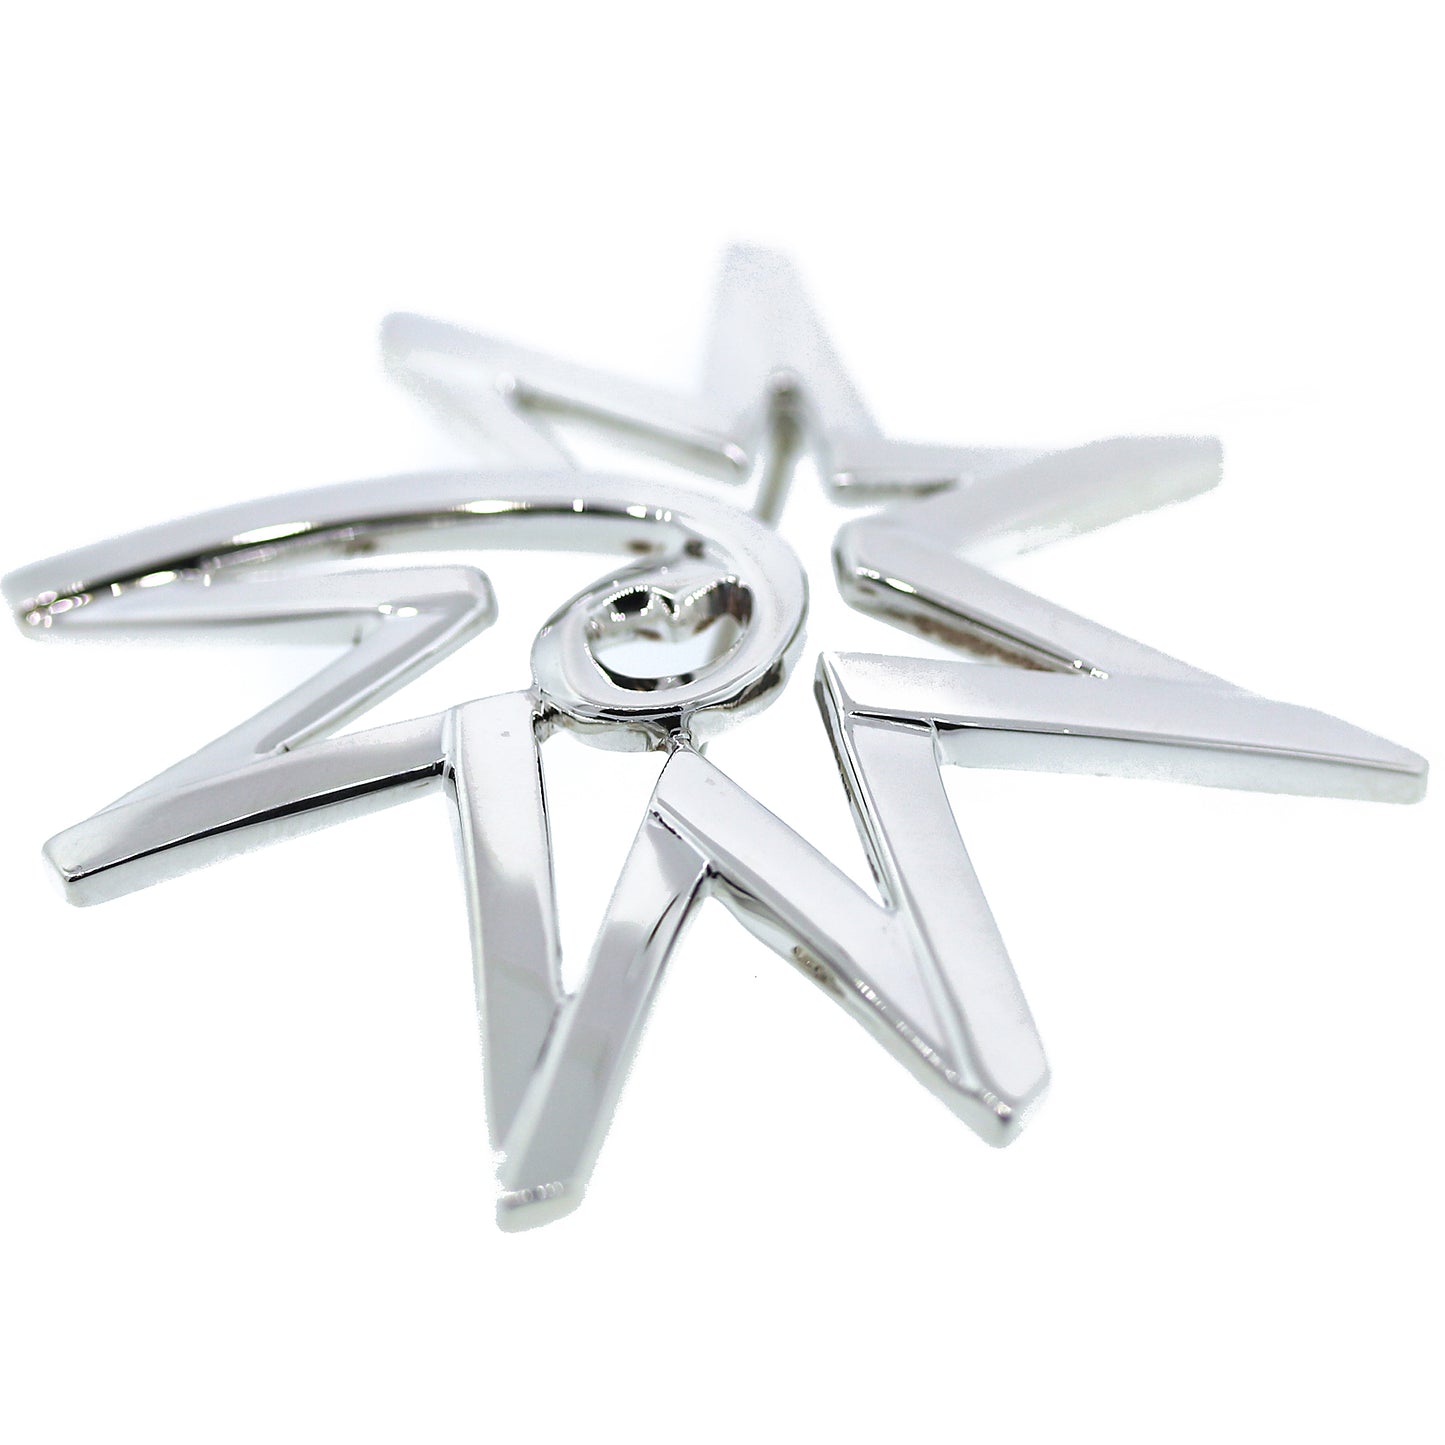 Preowned Tiffany and Co. Celestial Star Brooch in Sterling Silver